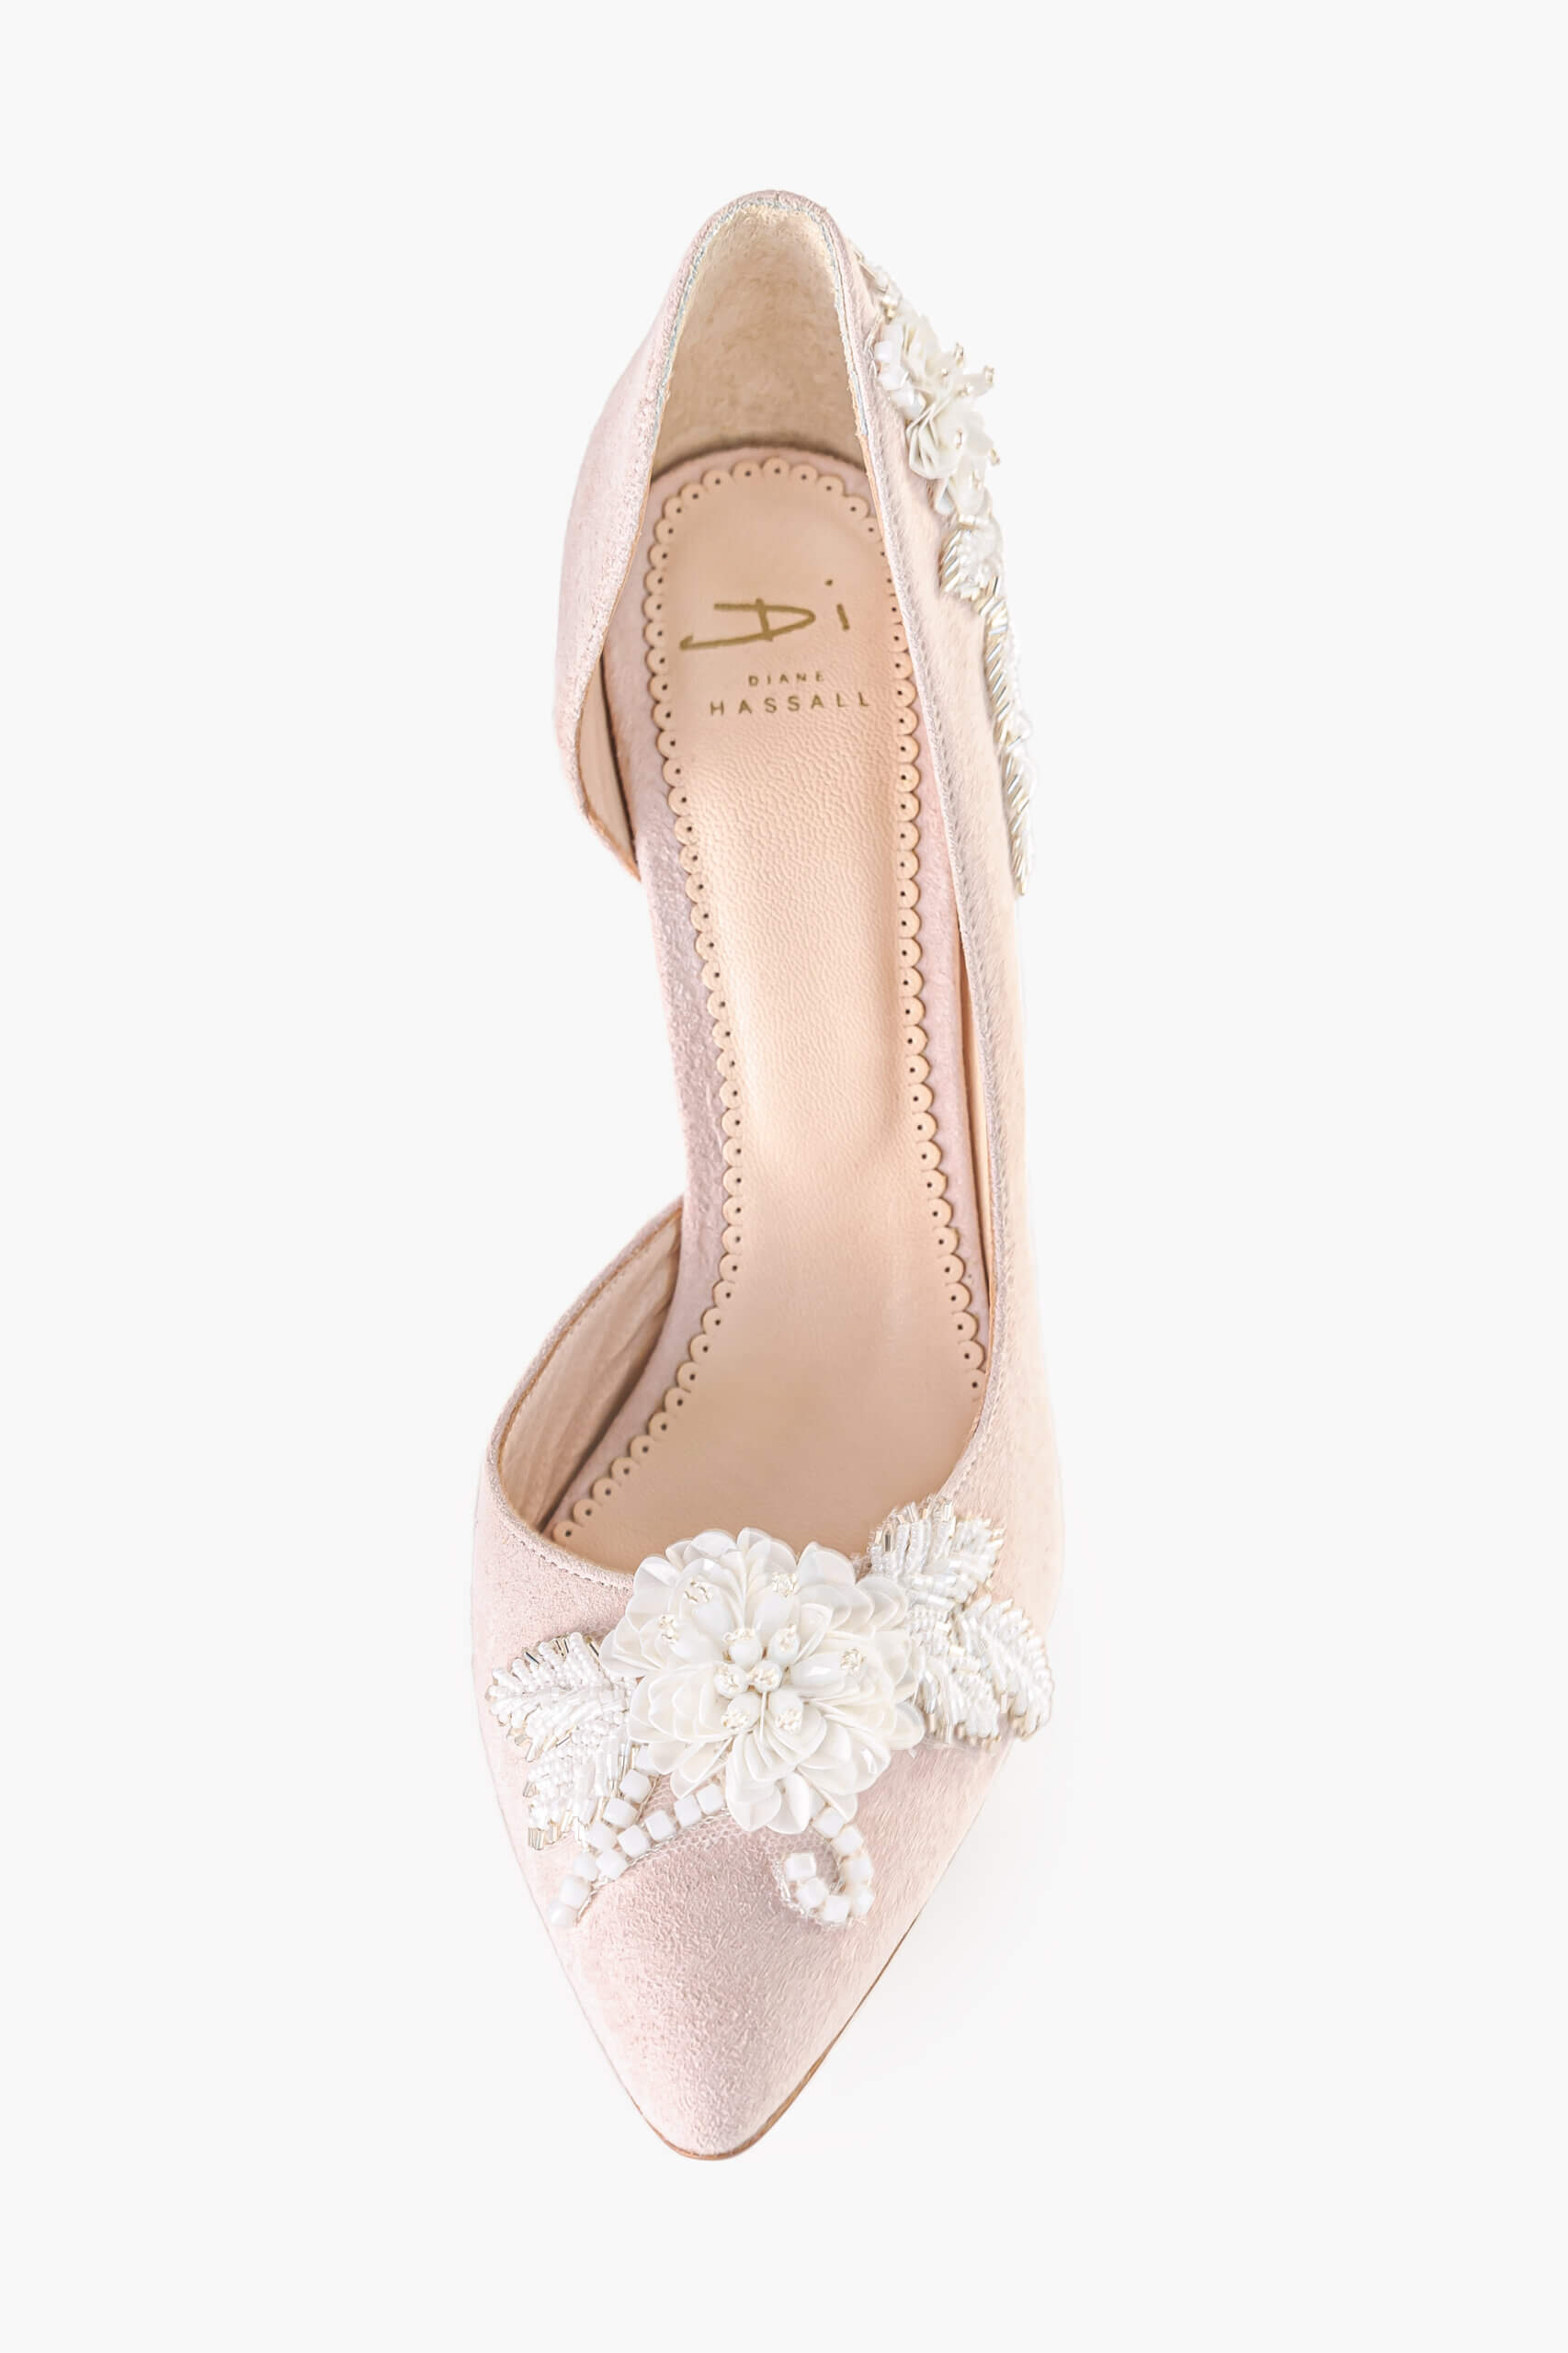 Pink Heel Shoes Wedding Shoes Wedding Pumps Wedding Shoes for Bride Gift  for Her Cross Straps Bridal Shoes Suede Shoes - Etsy | Wedding shoes heels,  Bride shoes, Pink wedding shoes